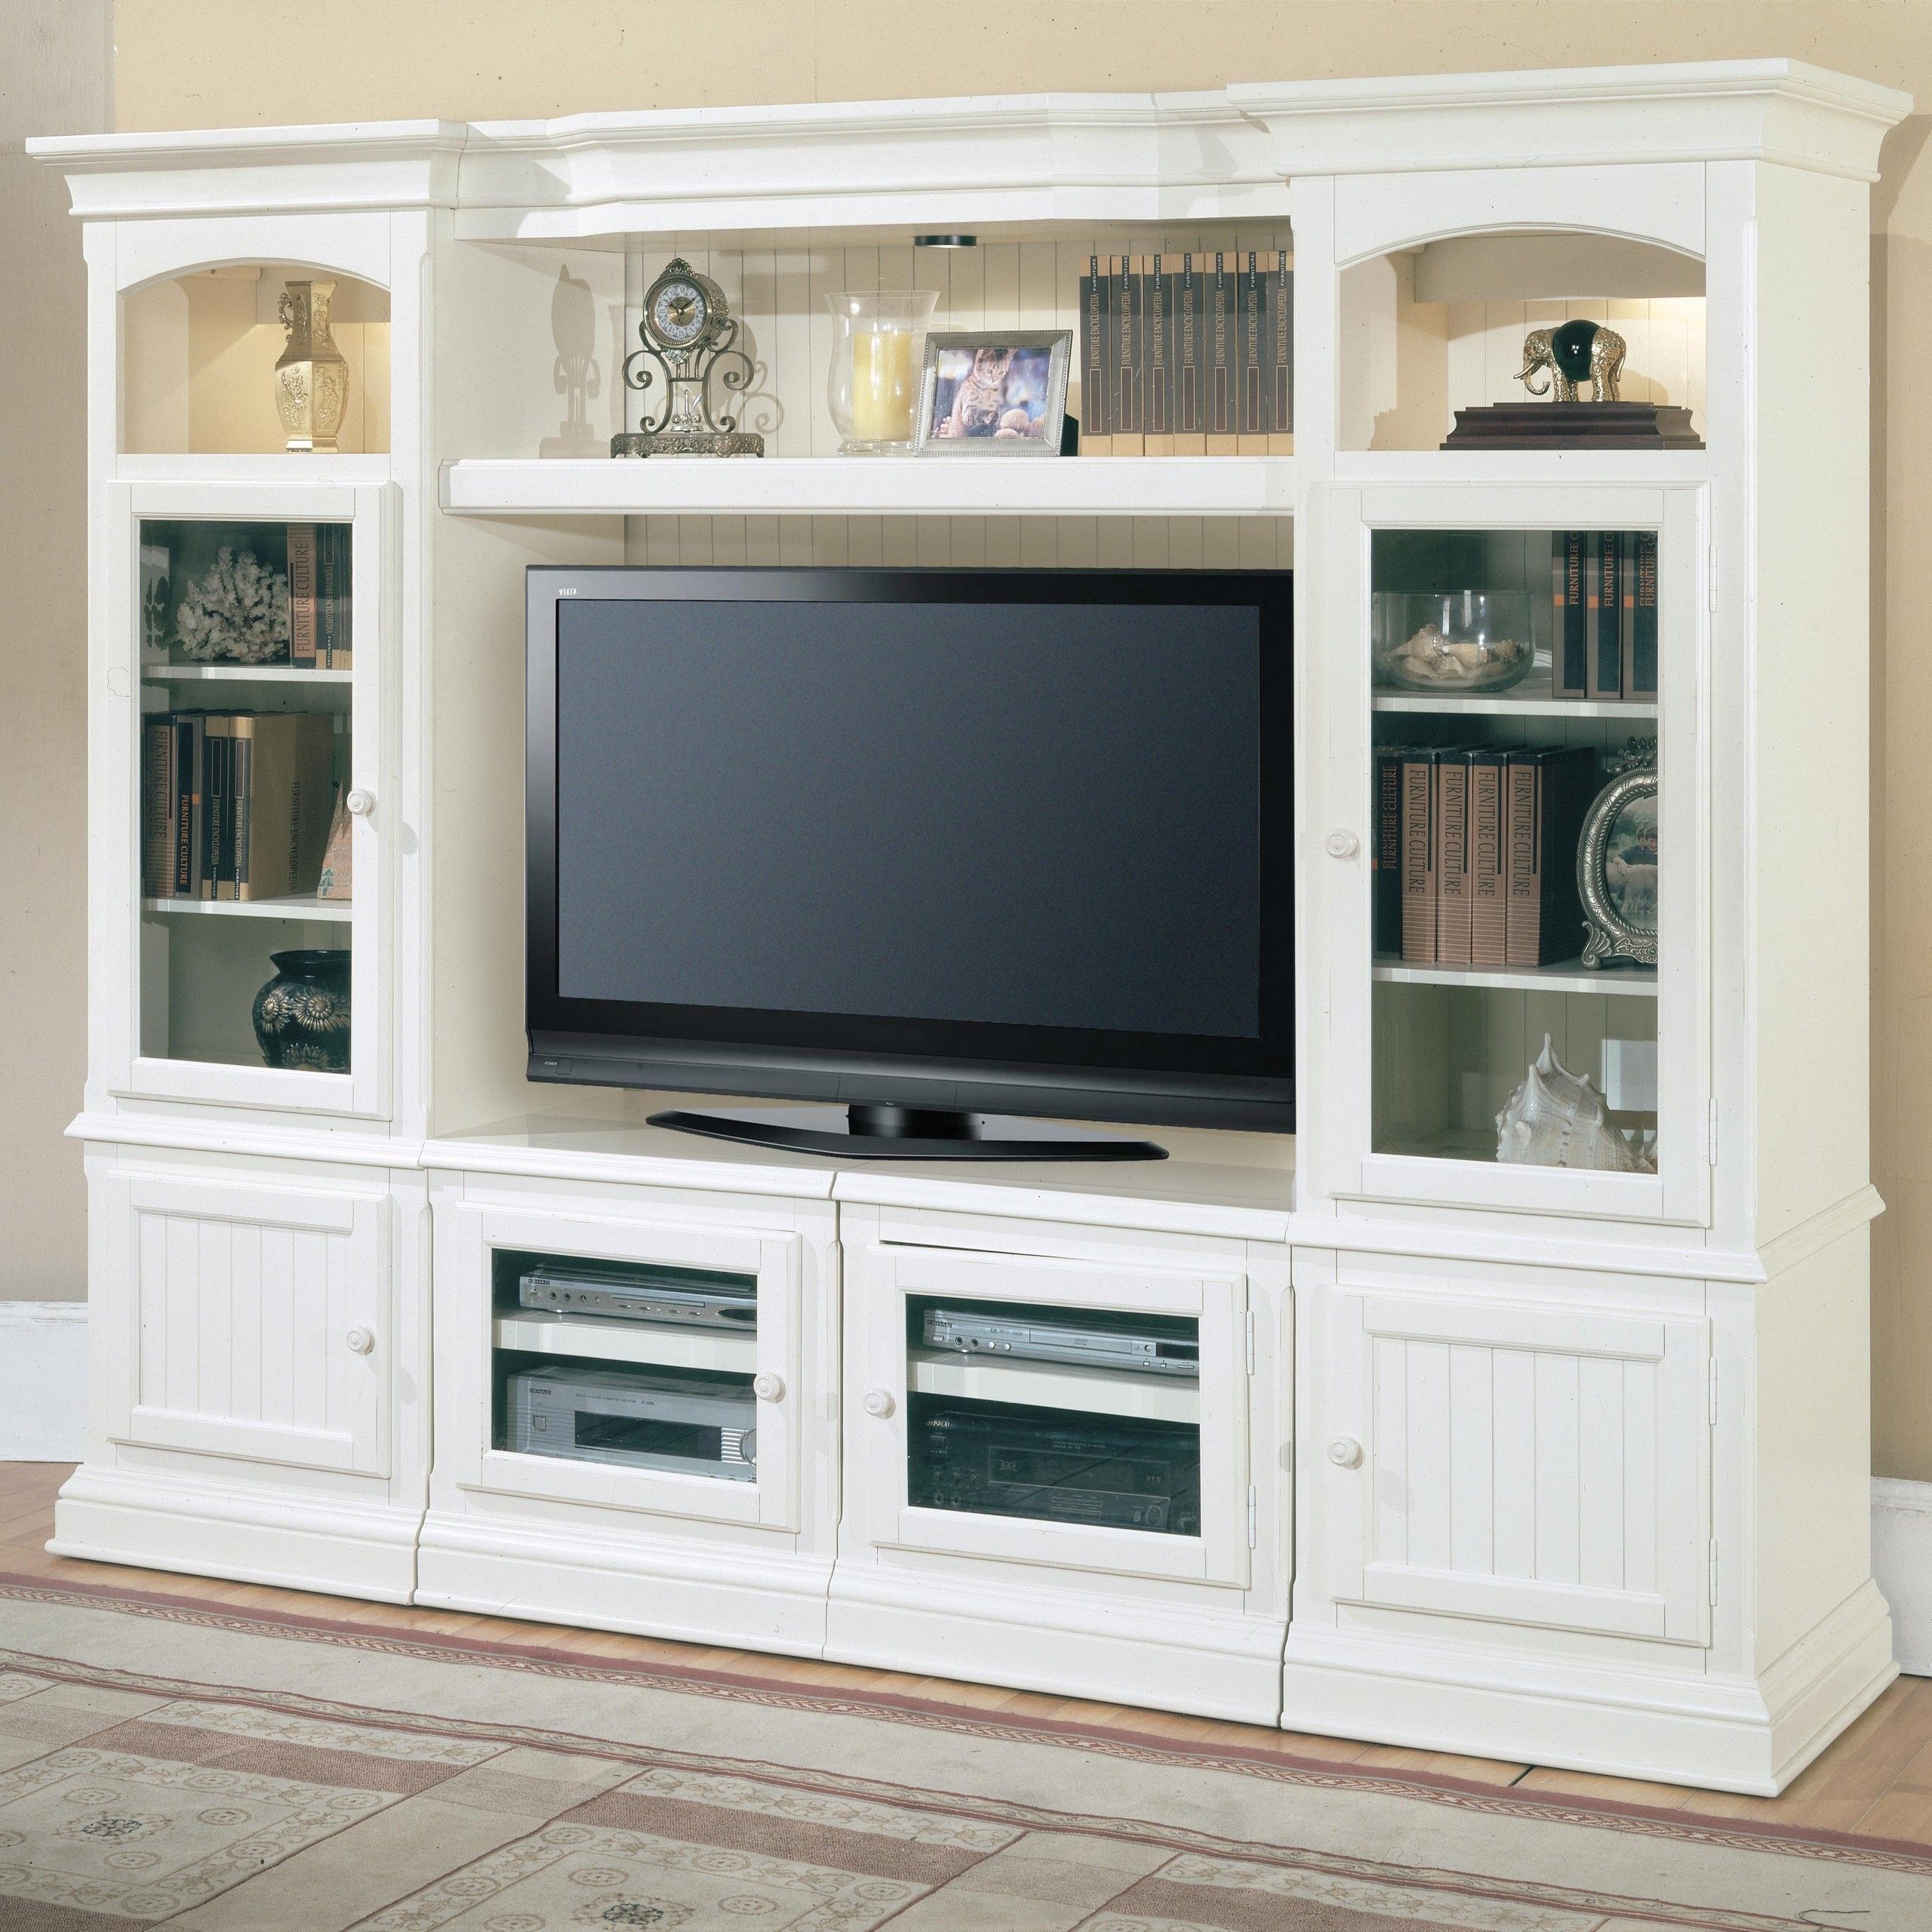 Traditional Entertainment Wall Units – Ideas On Foter In Entertainment Units With Bridge (View 15 of 20)